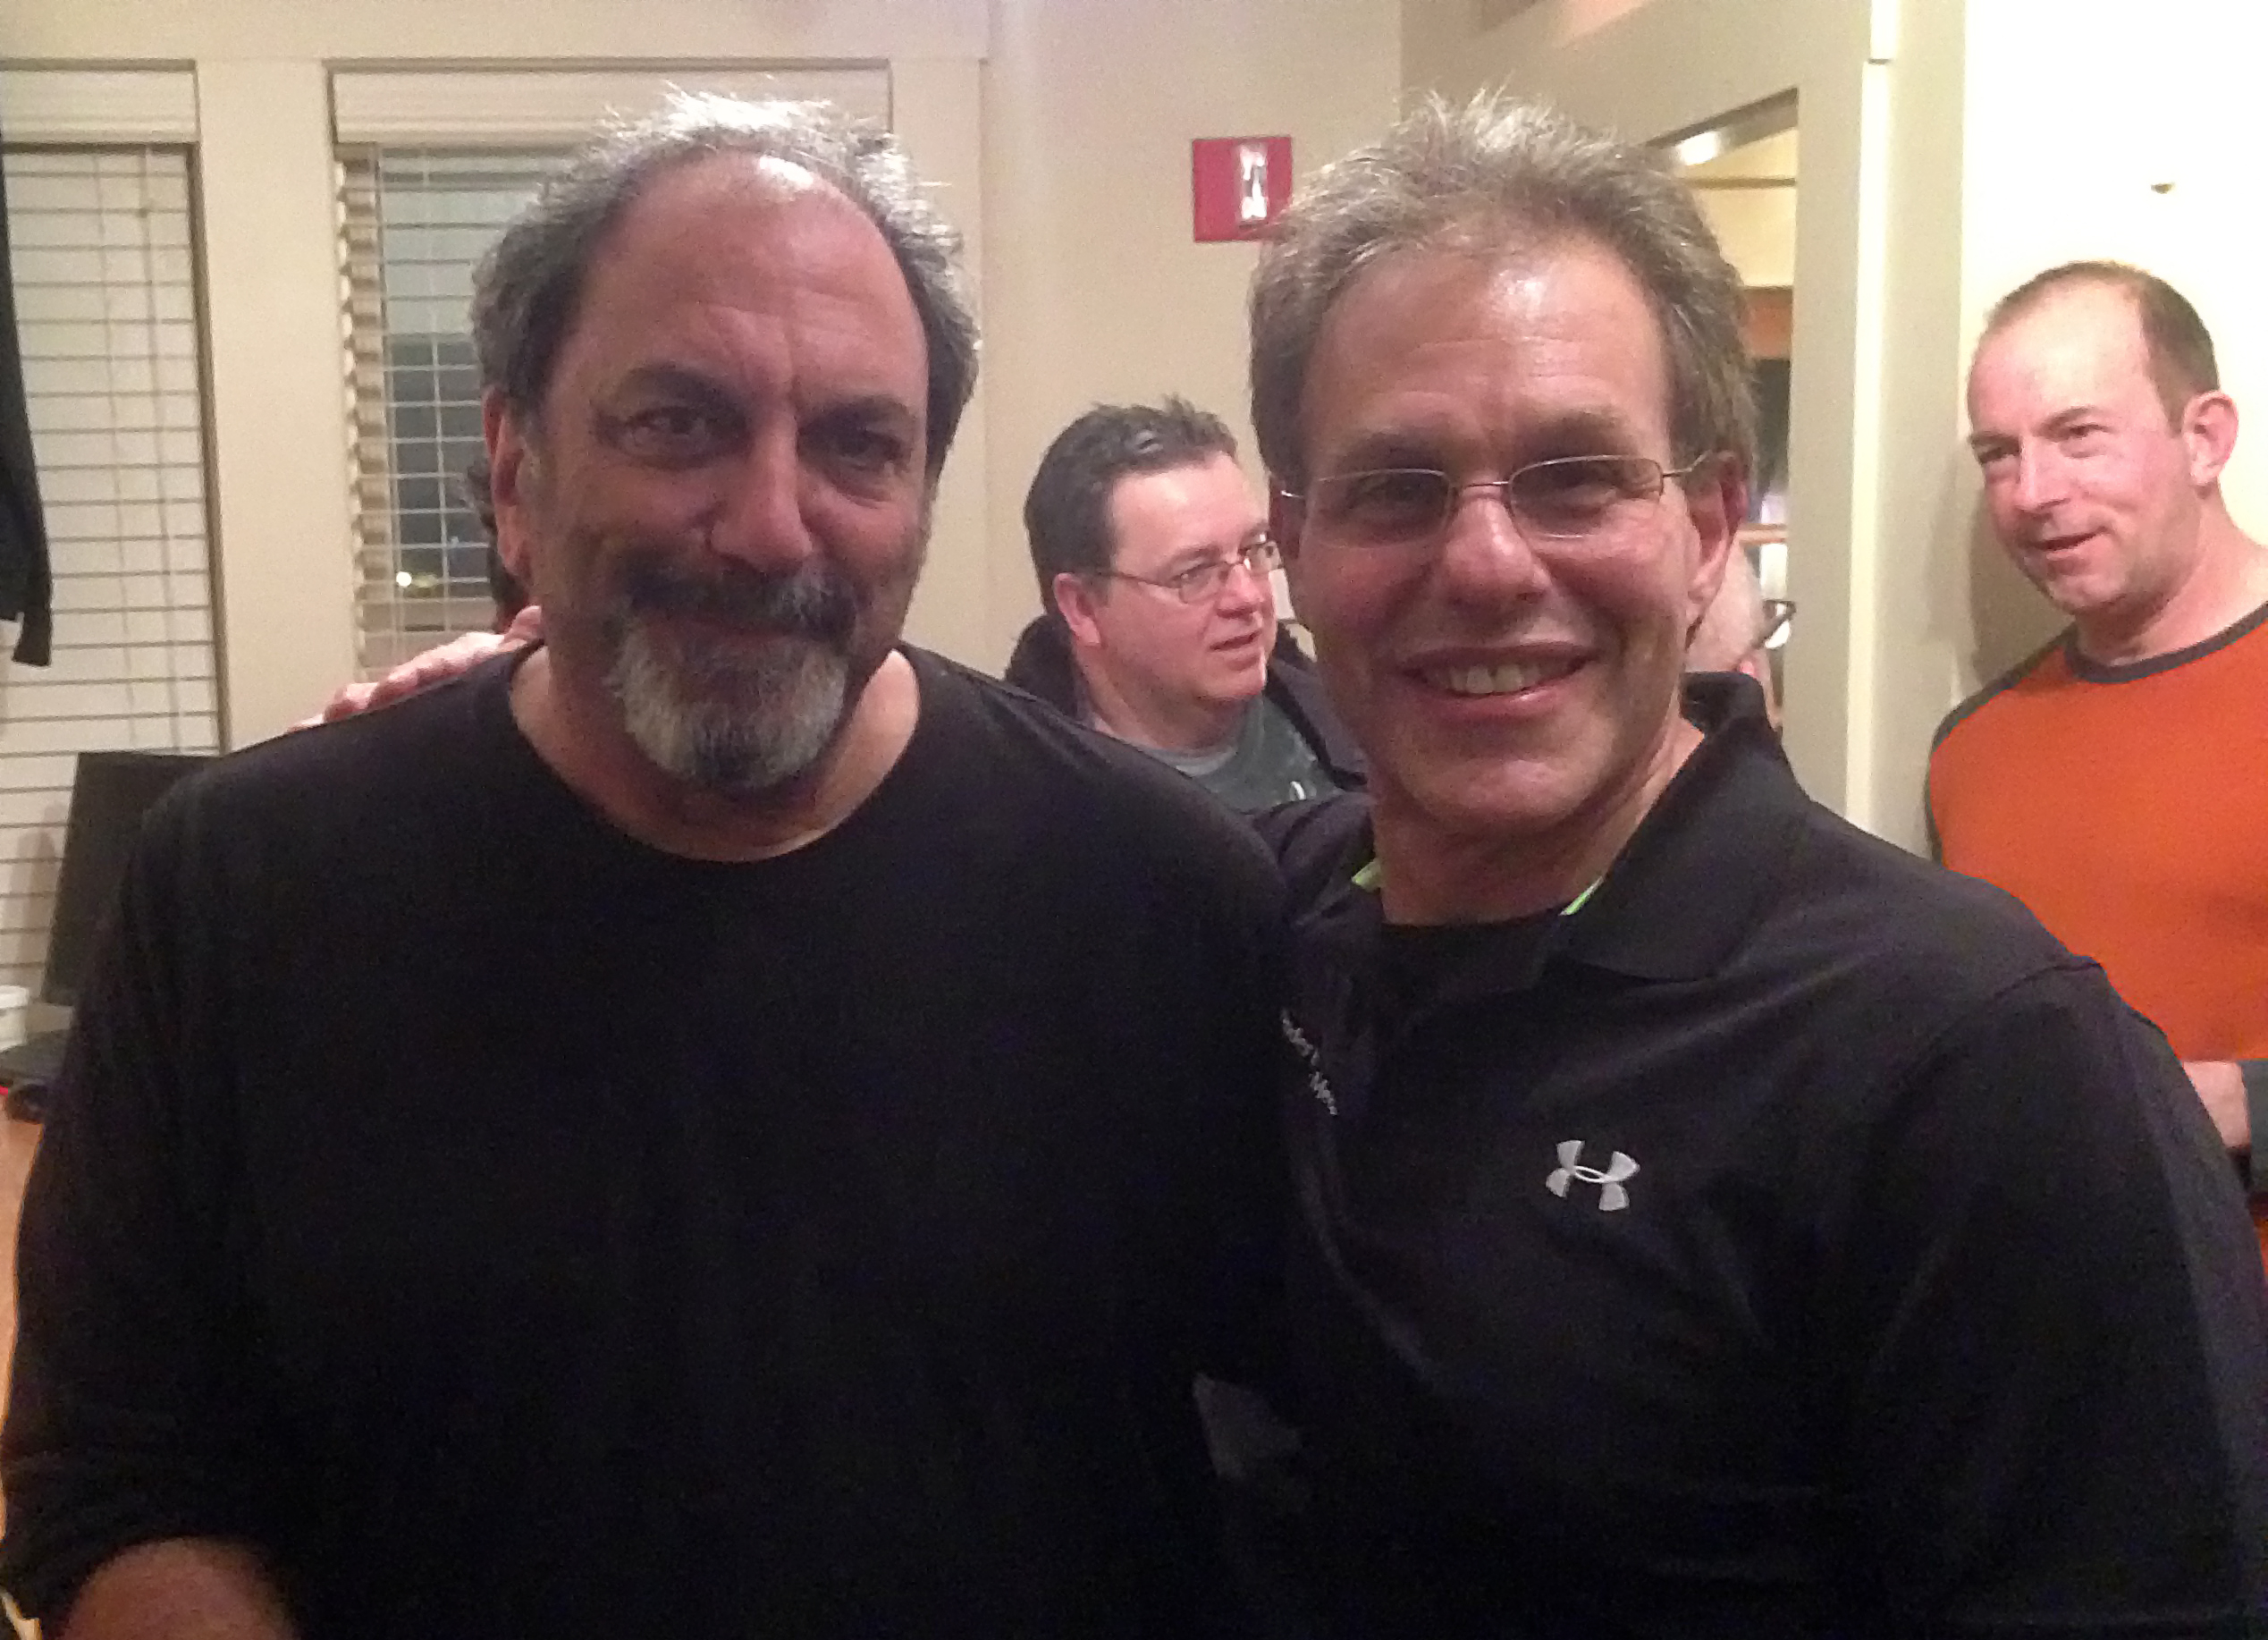 Elliot Gould of Render Edge Media with Jerry Marotta of the Security Project.